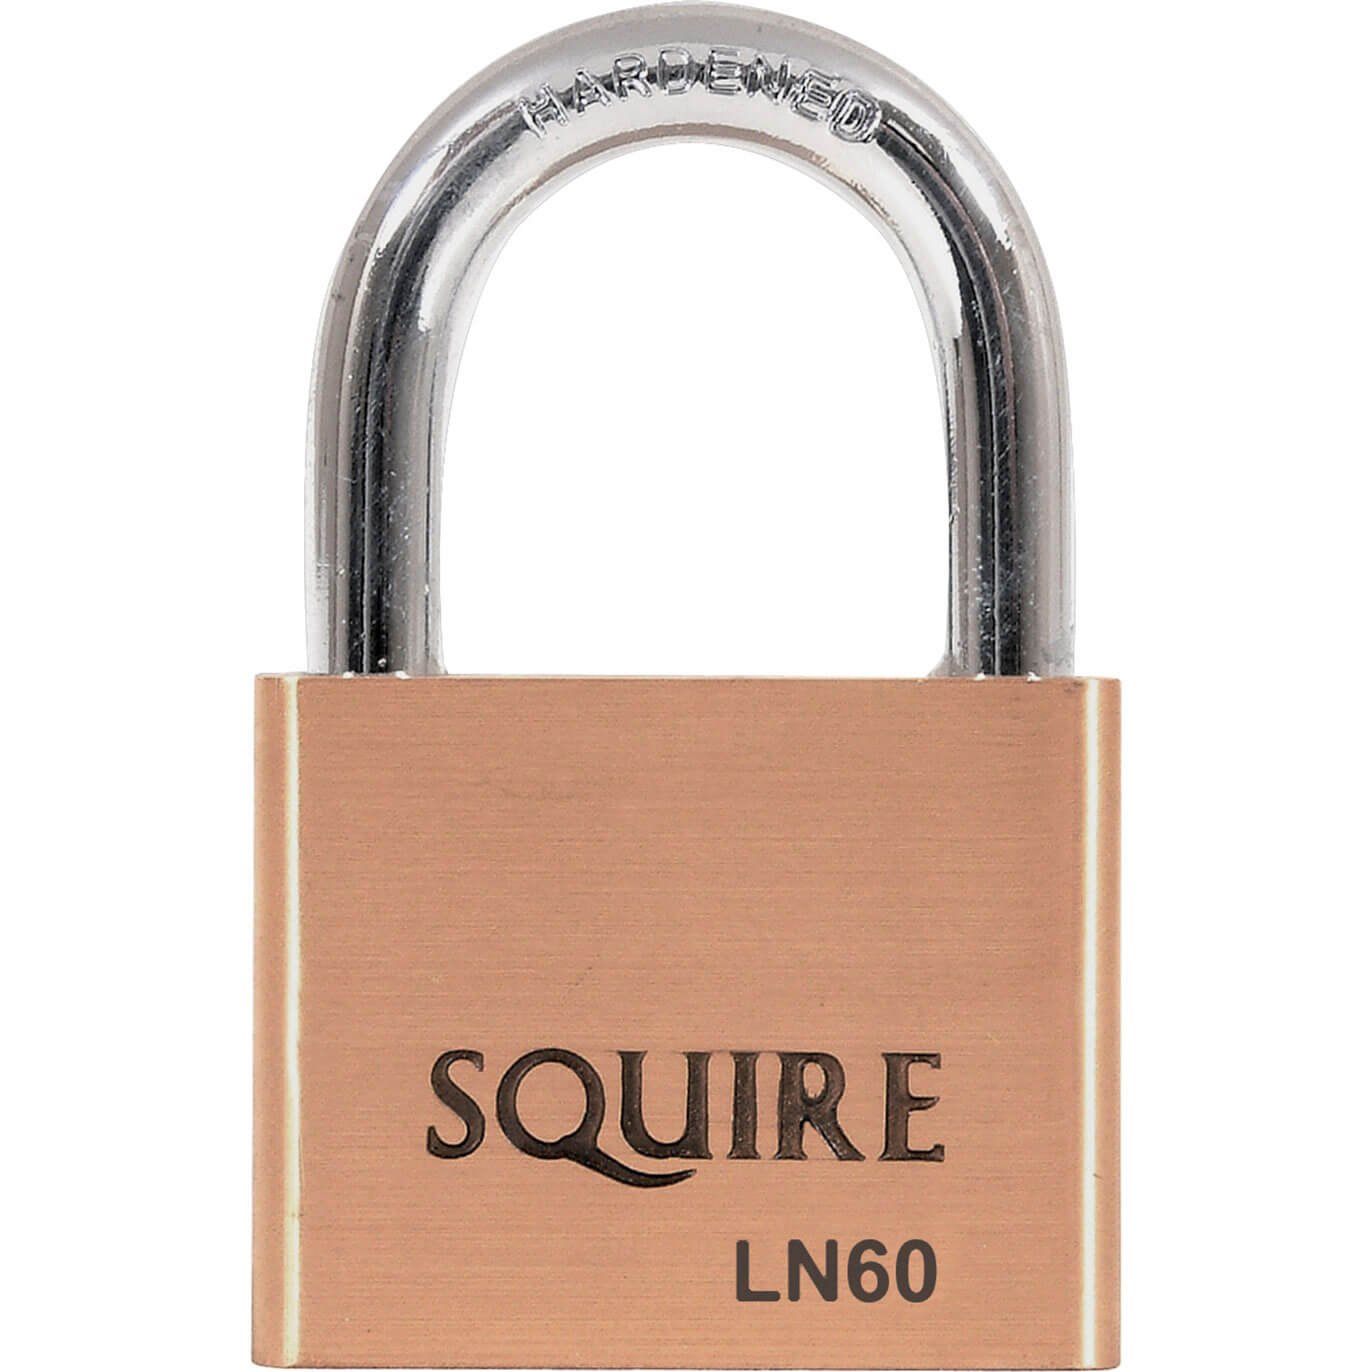 Image of Squire Lion Series Brass Padlock 60mm Standard